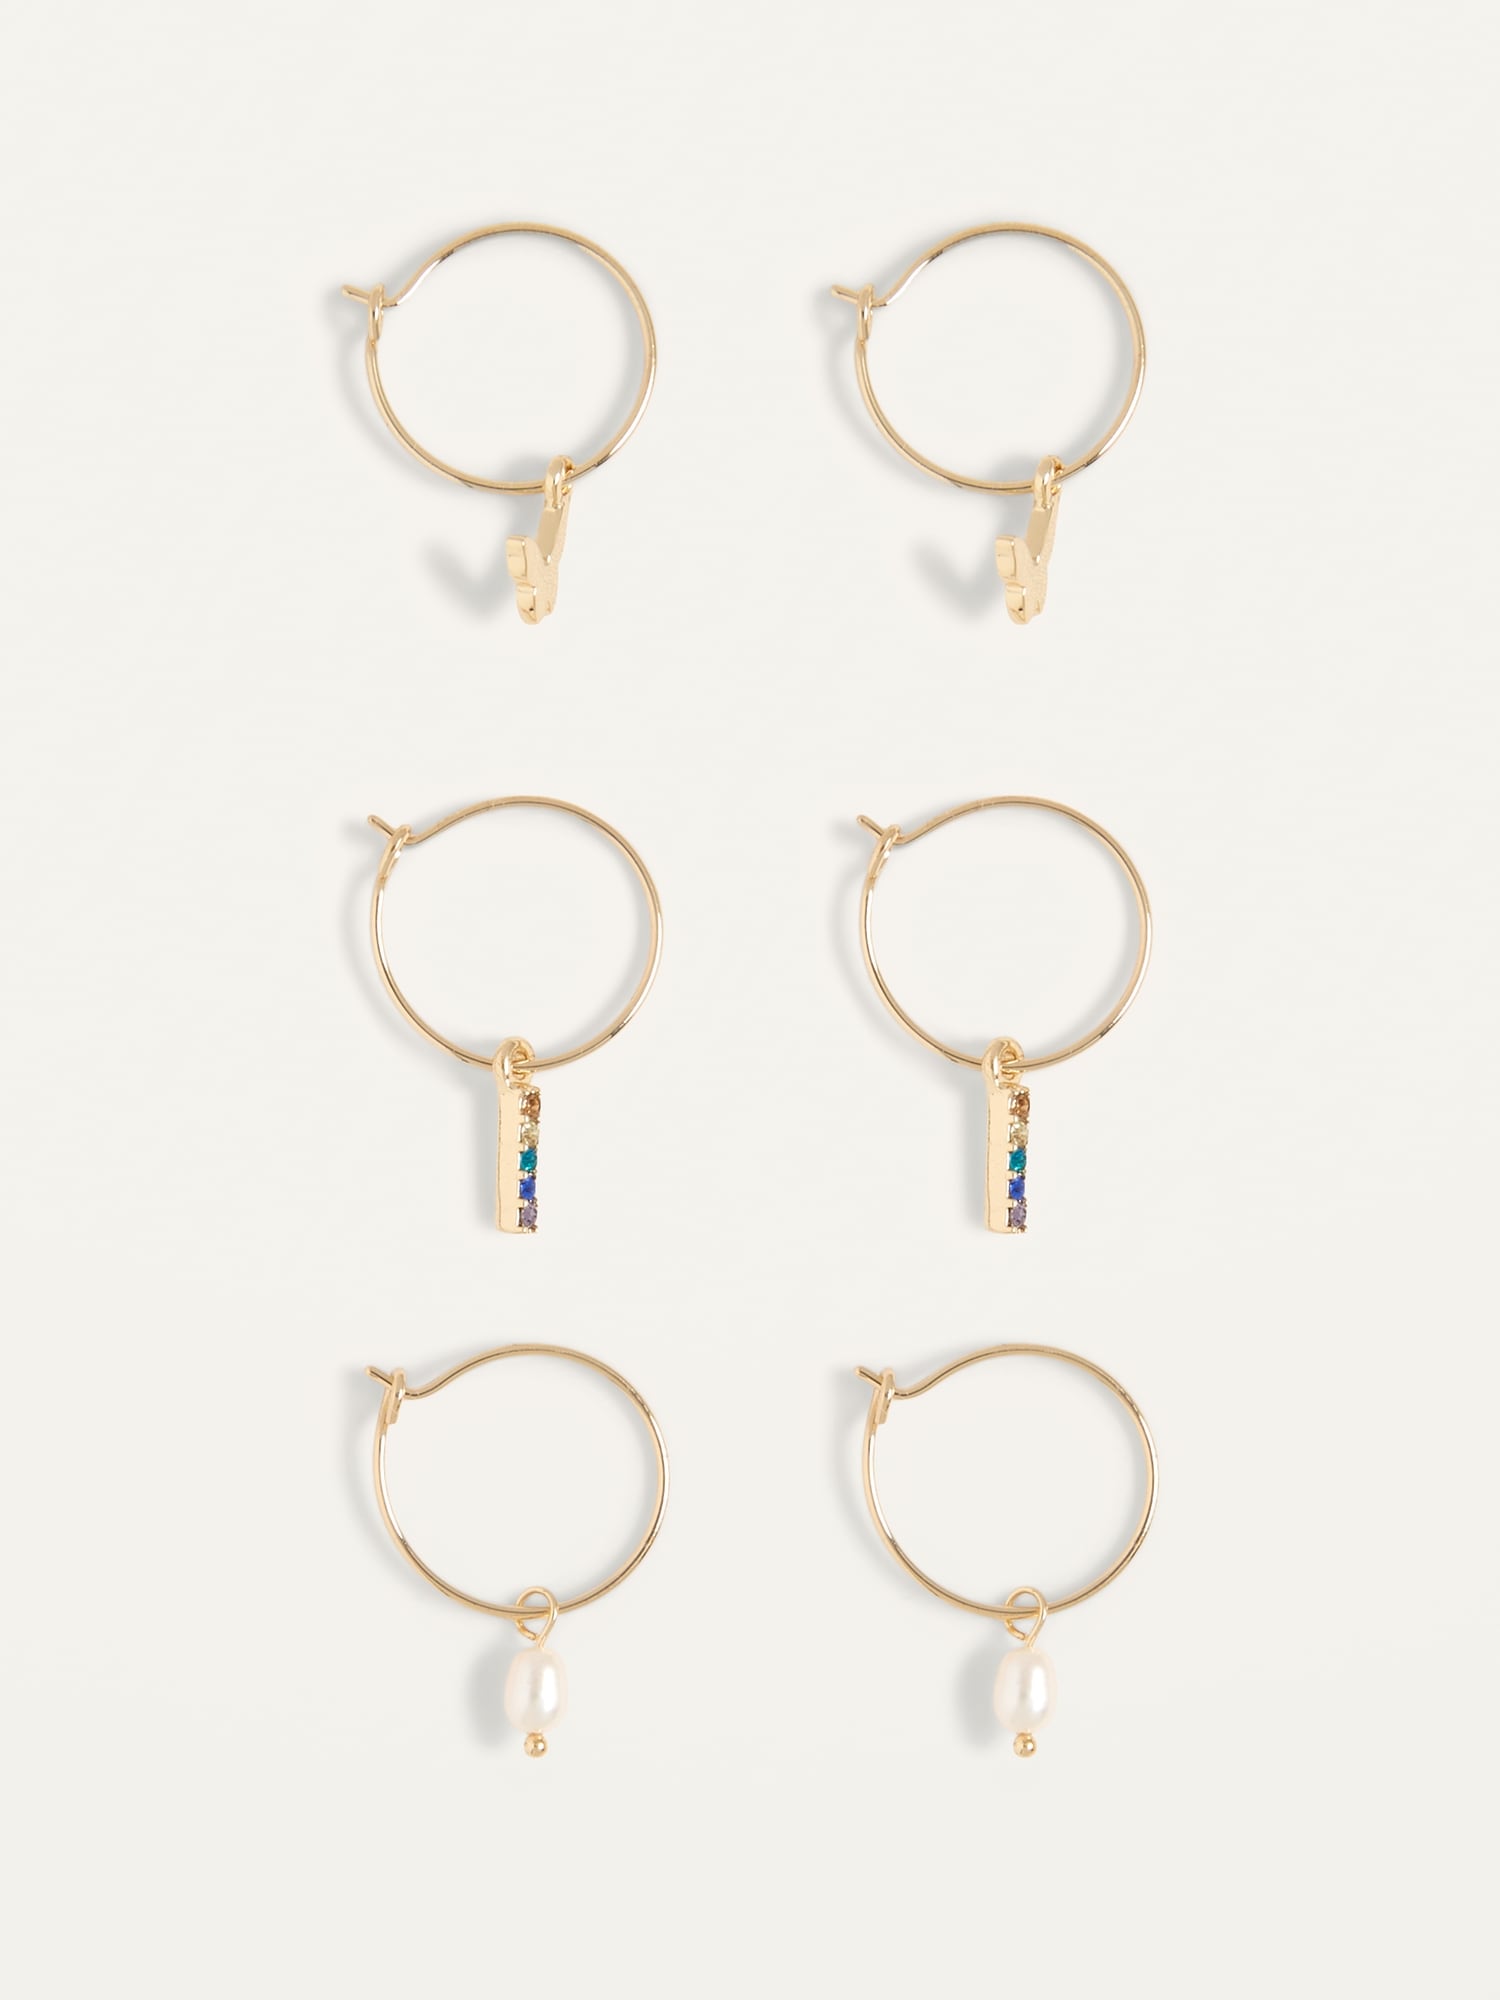 Old Navy Real Gold-Plated Hoop Earrings 3-Pack for Women gold. 1